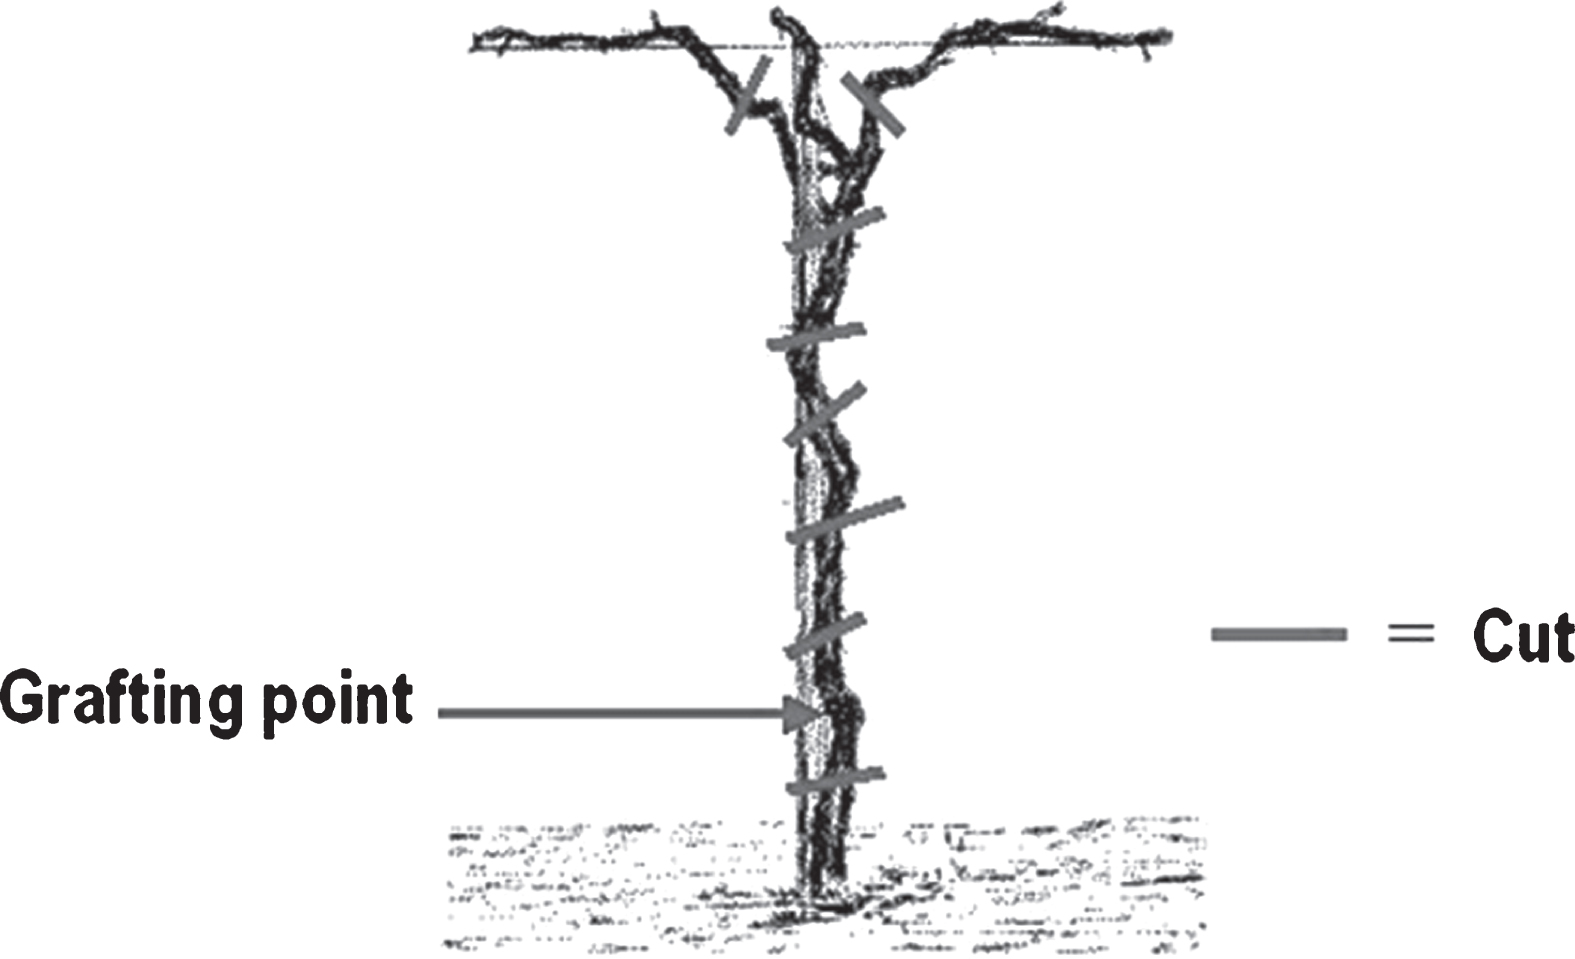 Position of cut disks (approx. 1-2 cm thick) from kiwifruit plants for the isolation of endophytes. One disk was cut below the grafting point, two disks at the base of the main cordons, other disks were taken along the trunk.